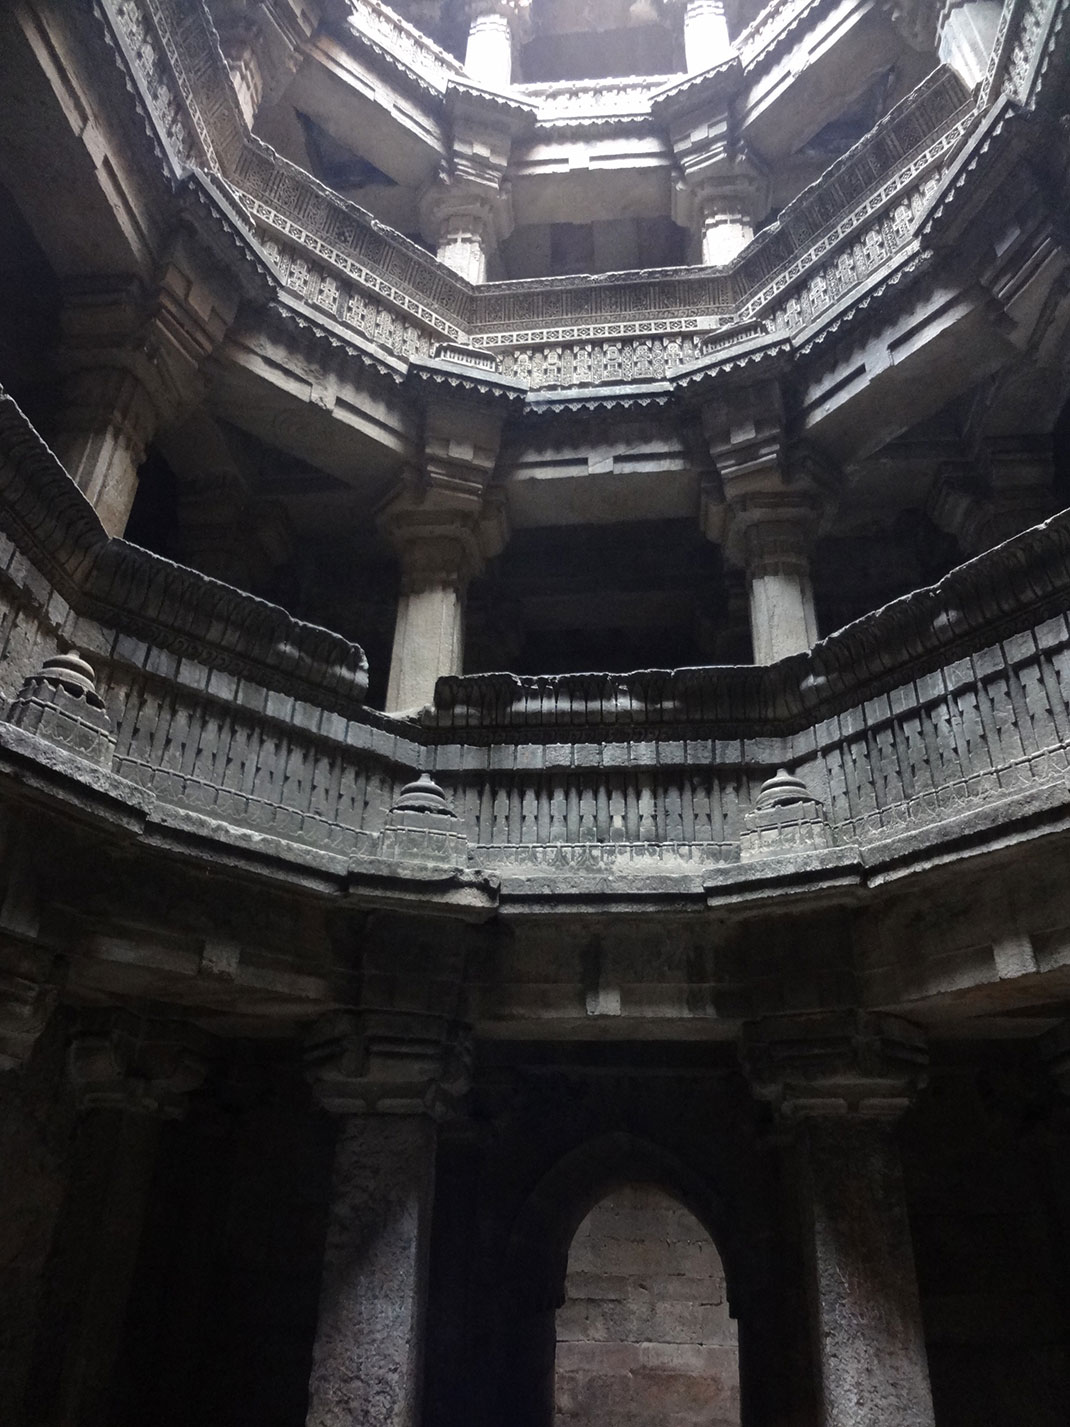 Admire These 2000 Year Old Somptous Buildings In India Destined To Disappear-23